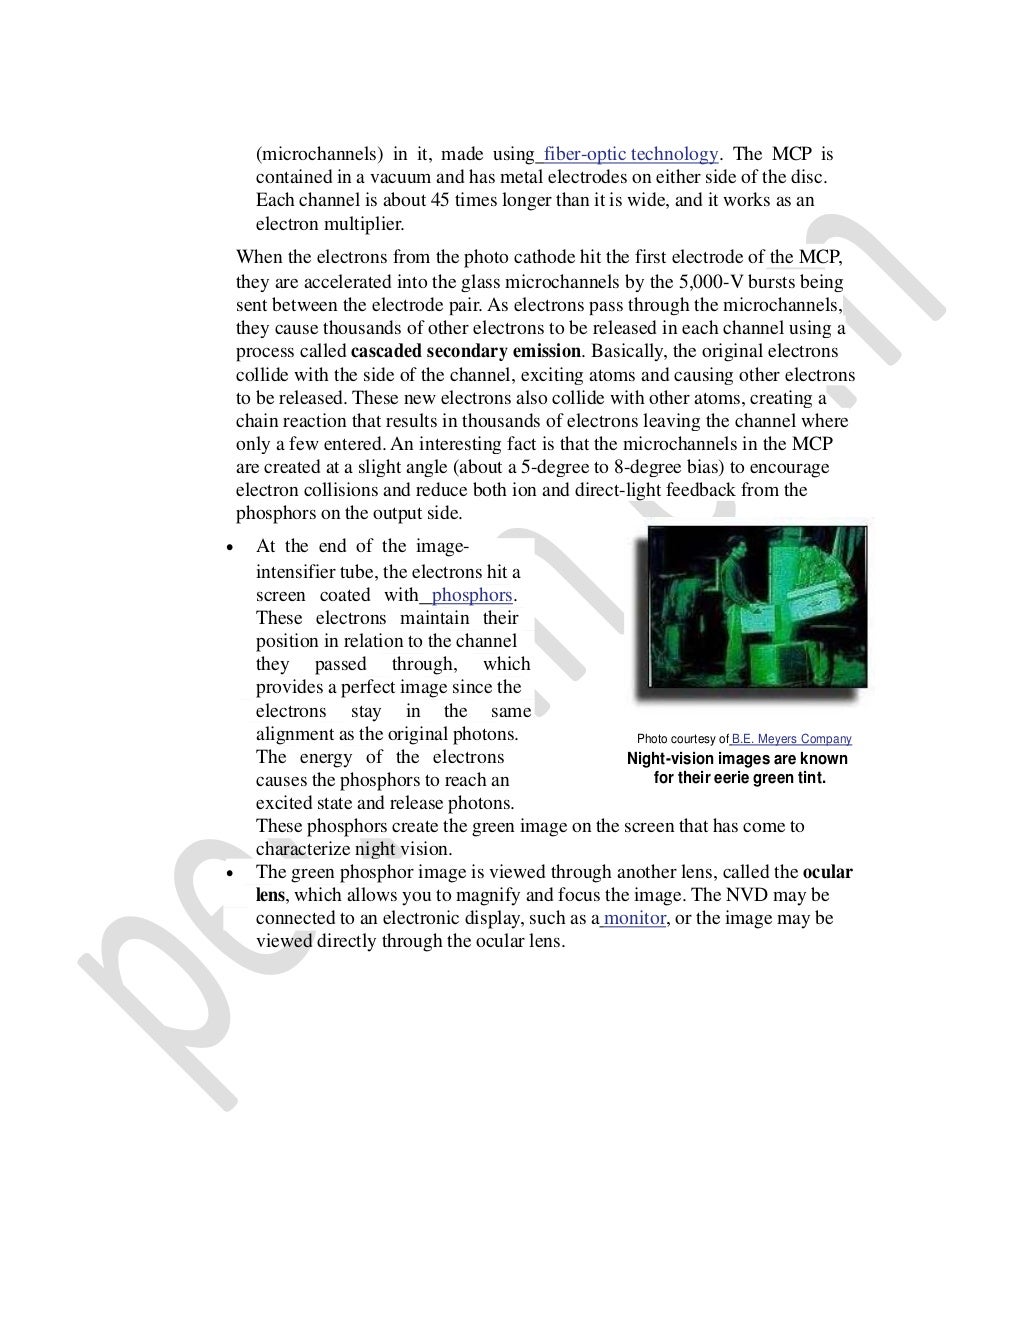 literature review on night vision technology